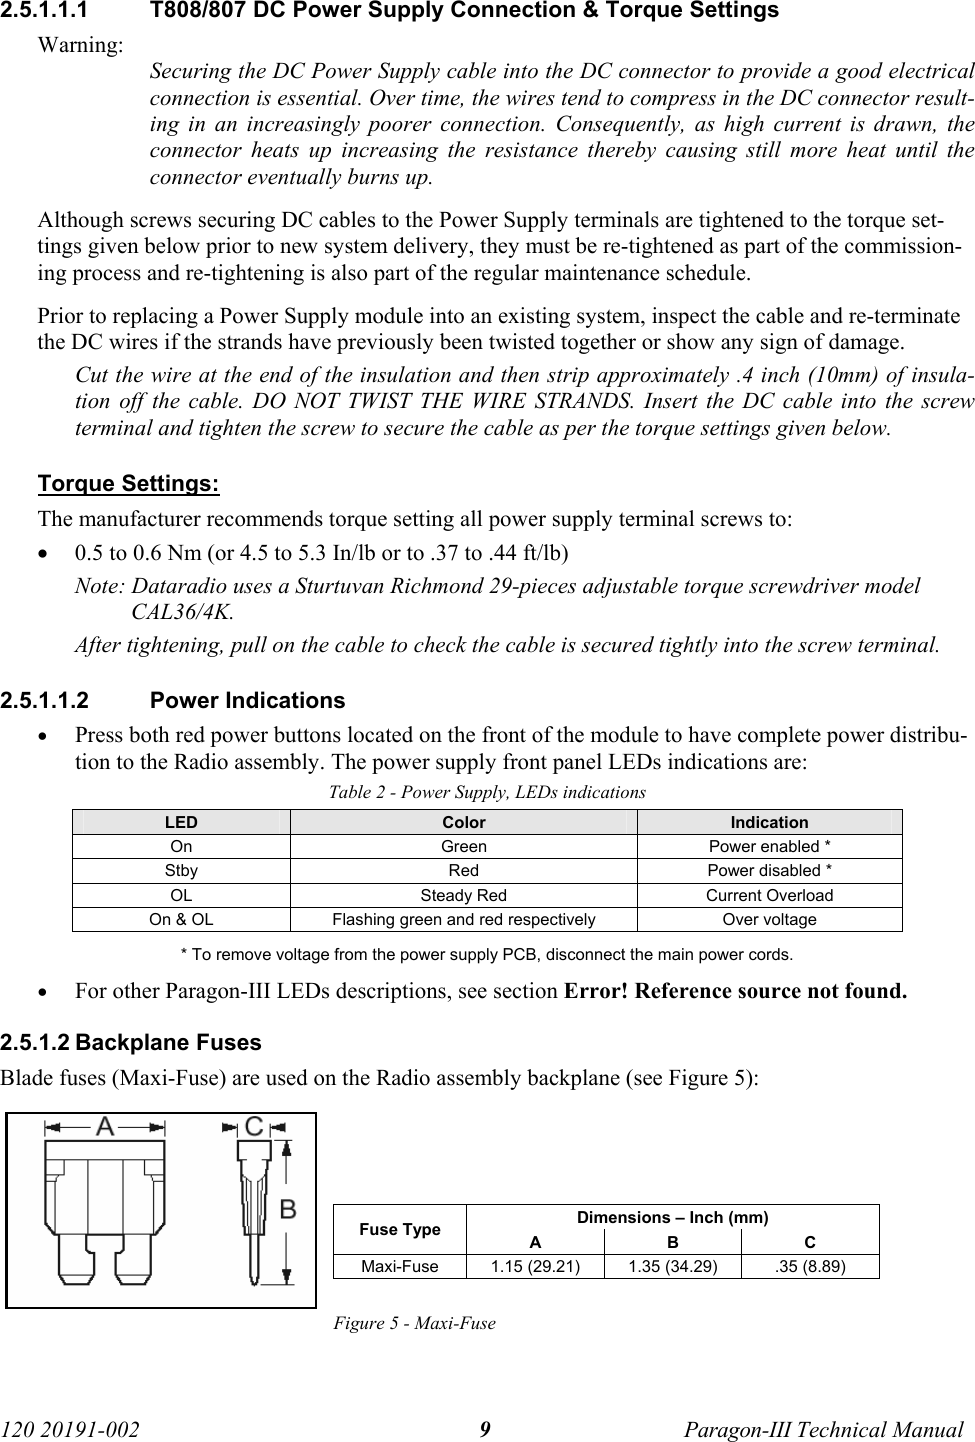   120 20191-002  Paragon-III Technical Manual 9 2.5.1.1.1  T808/807 DC Power Supply Connection &amp; Torque Settings Warning: Securing the DC Power Supply cable into the DC connector to provide a good electrical connection is essential. Over time, the wires tend to compress in the DC connector result-ing in an increasingly poorer connection. Consequently, as high current is drawn, the connector heats up increasing the resistance thereby causing still more heat until the connector eventually burns up.  Although screws securing DC cables to the Power Supply terminals are tightened to the torque set-tings given below prior to new system delivery, they must be re-tightened as part of the commission-ing process and re-tightening is also part of the regular maintenance schedule. Prior to replacing a Power Supply module into an existing system, inspect the cable and re-terminate the DC wires if the strands have previously been twisted together or show any sign of damage. Cut the wire at the end of the insulation and then strip approximately .4 inch (10mm) of insula-tion off the cable. DO NOT TWIST THE WIRE STRANDS. Insert the DC cable into the screw terminal and tighten the screw to secure the cable as per the torque settings given below. Torque Settings:  The manufacturer recommends torque setting all power supply terminal screws to: • 0.5 to 0.6 Nm (or 4.5 to 5.3 In/lb or to .37 to .44 ft/lb) Note: Dataradio uses a Sturtuvan Richmond 29-pieces adjustable torque screwdriver model CAL36/4K. After tightening, pull on the cable to check the cable is secured tightly into the screw terminal. 2.5.1.1.2 Power Indications • Press both red power buttons located on the front of the module to have complete power distribu-tion to the Radio assembly. The power supply front panel LEDs indications are: Table 2 - Power Supply, LEDs indications LED  Color  Indication On  Green  Power enabled * Stby  Red  Power disabled * OL  Steady Red  Current Overload On &amp; OL  Flashing green and red respectively  Over voltage  * To remove voltage from the power supply PCB, disconnect the main power cords. • For other Paragon-III LEDs descriptions, see section Error! Reference source not found. 2.5.1.2 Backplane Fuses Blade fuses (Maxi-Fuse) are used on the Radio assembly backplane (see Figure 5):     Dimensions – Inch (mm) Fuse Type  A B C Maxi-Fuse  1.15 (29.21)  1.35 (34.29)  .35 (8.89)  Figure 5 - Maxi-Fuse 